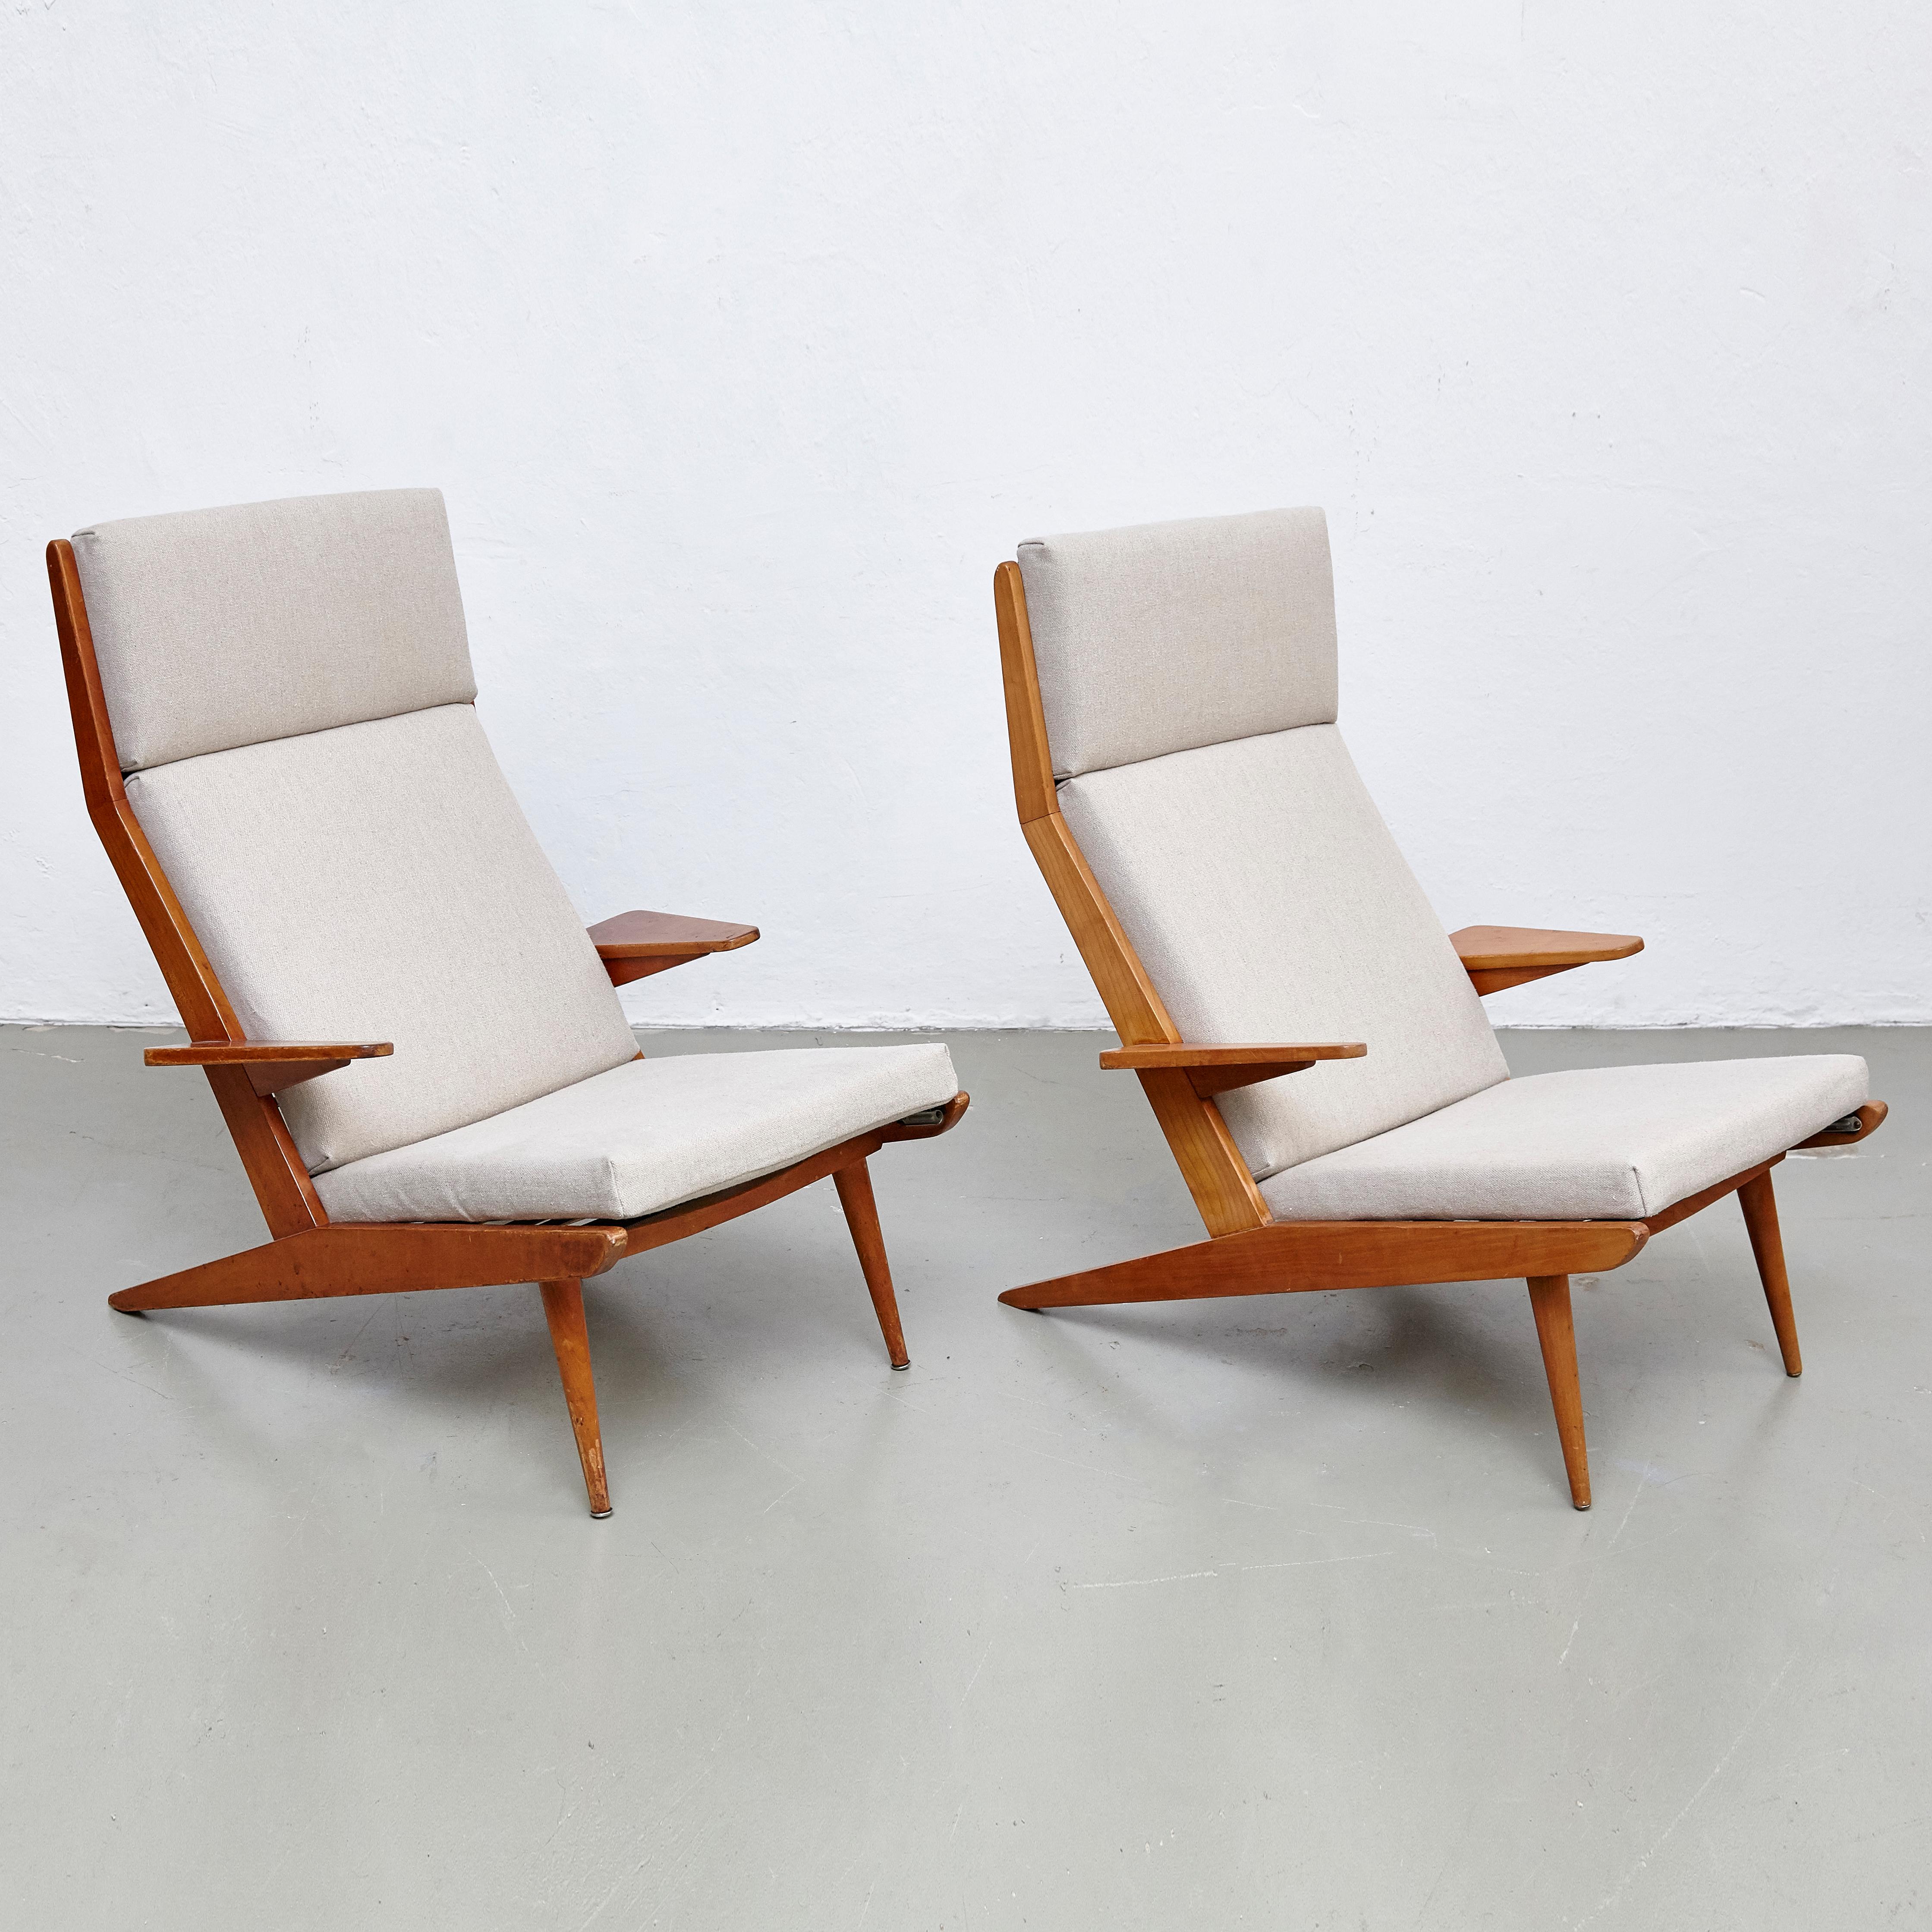 High back lounge chair by Koene Oberman, circa 1960.

Originated in Denmark

In good original condition, with minor wear consistent with age and use, preserving a beautiful patina.

New upholstery.

 